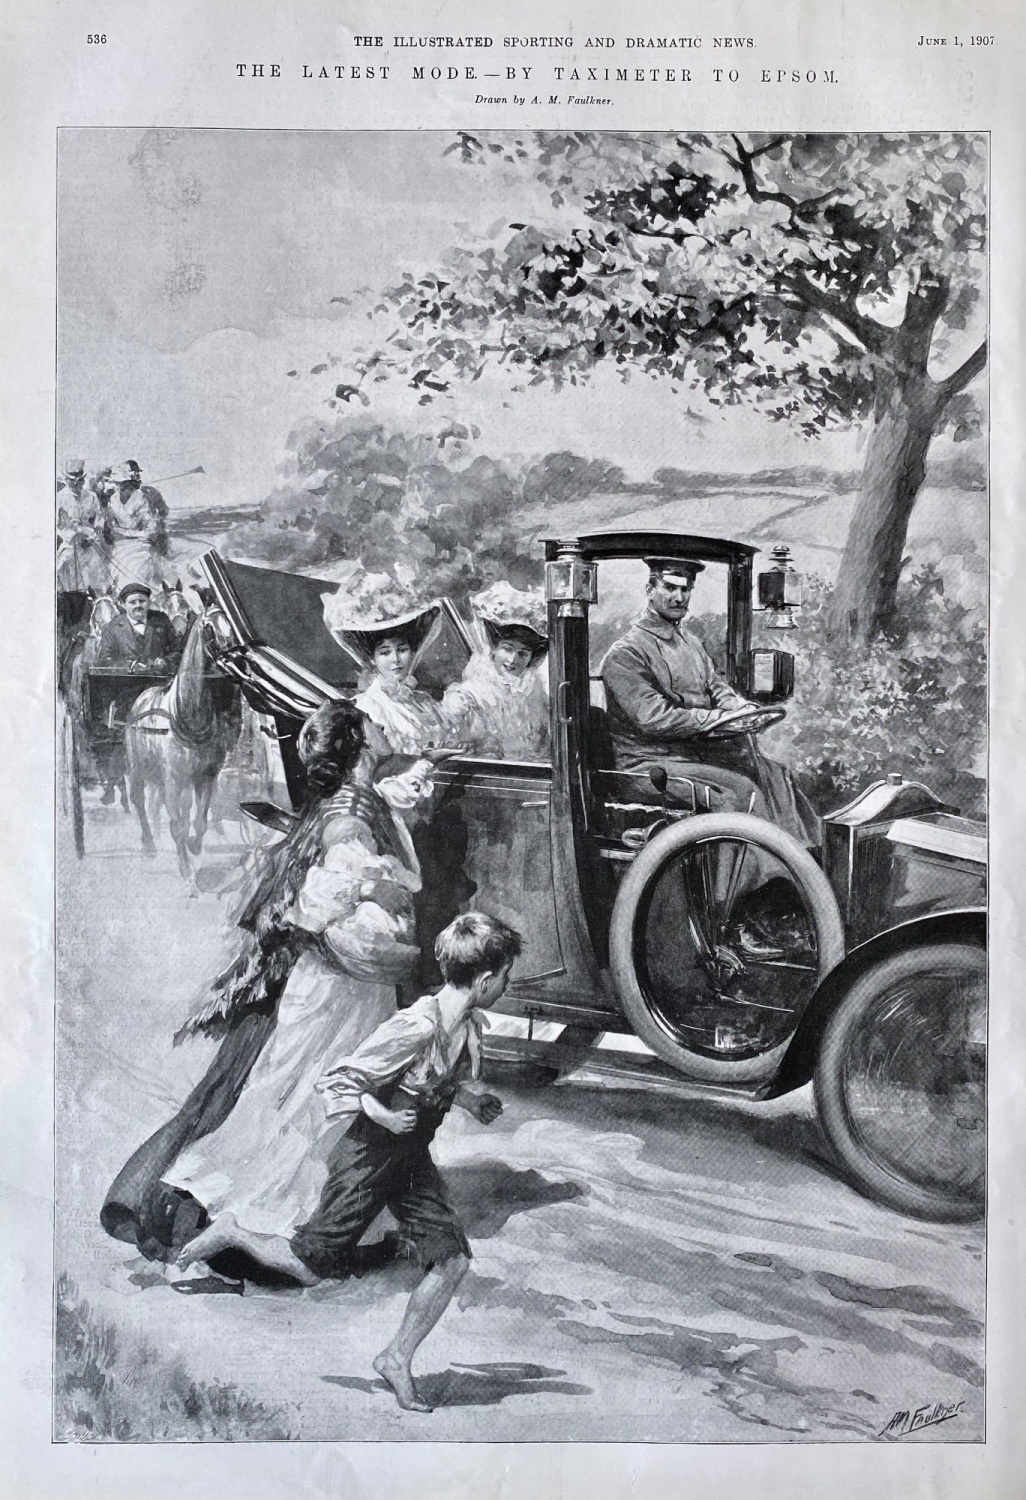 The Latest Mode.  - By Taximeter  to London.  1907